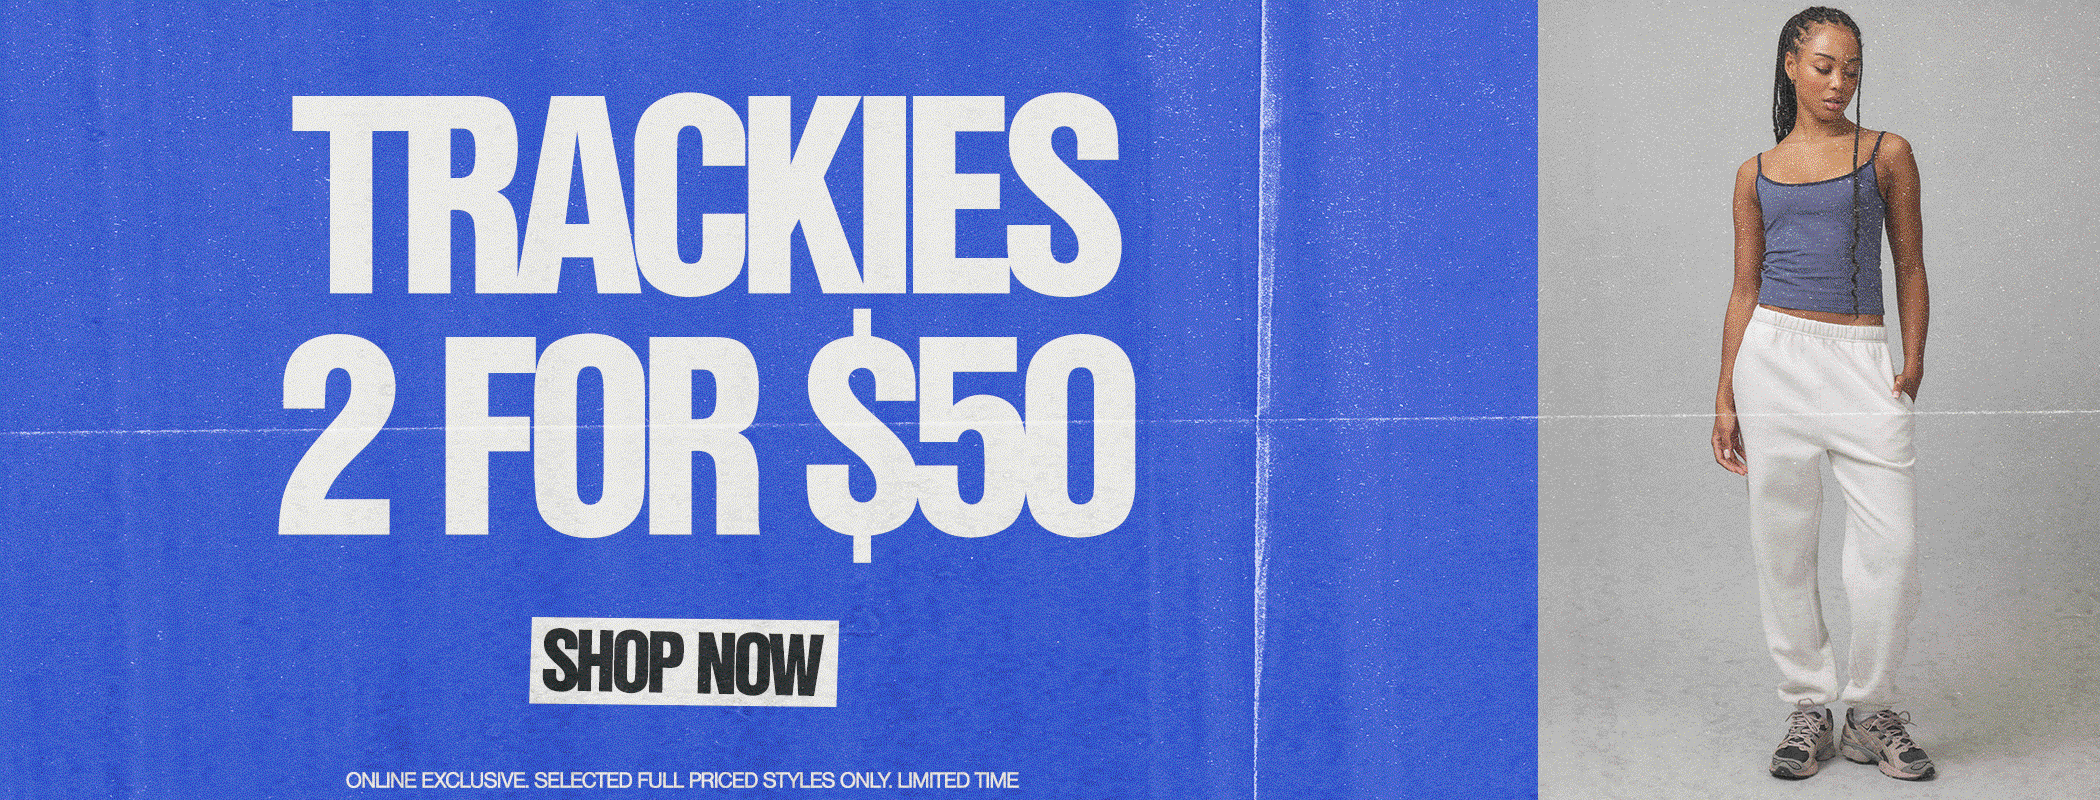 2 For $50 Trackies! Online exclusive. Selected styles.